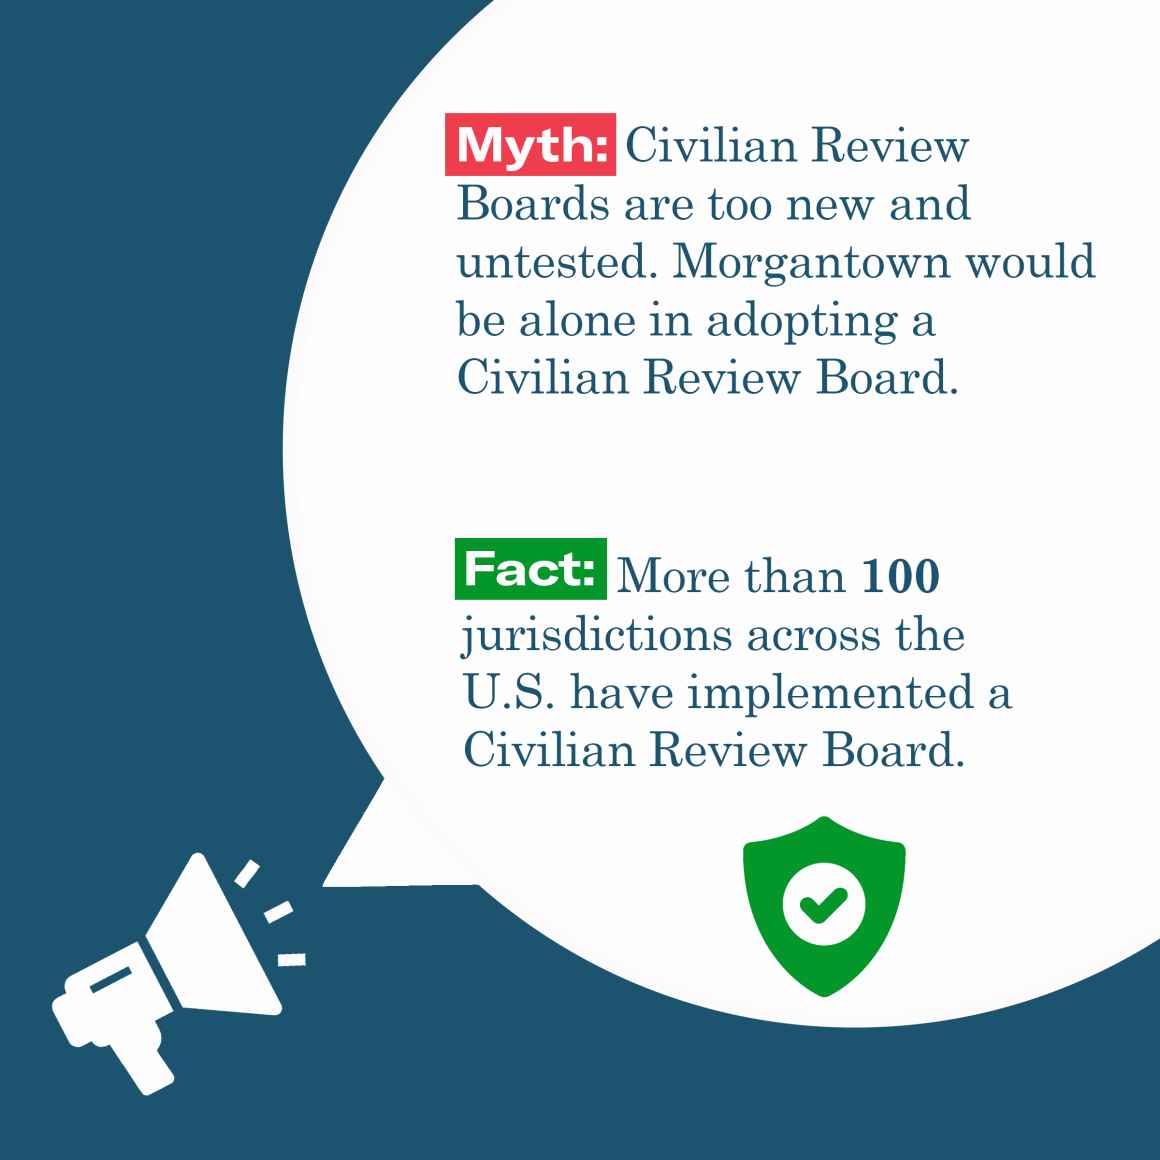 Review boards are too new and untested. Morgantown would be along in adopting one. Fact: More than 100 jurisdictions in the US have adopted a review board